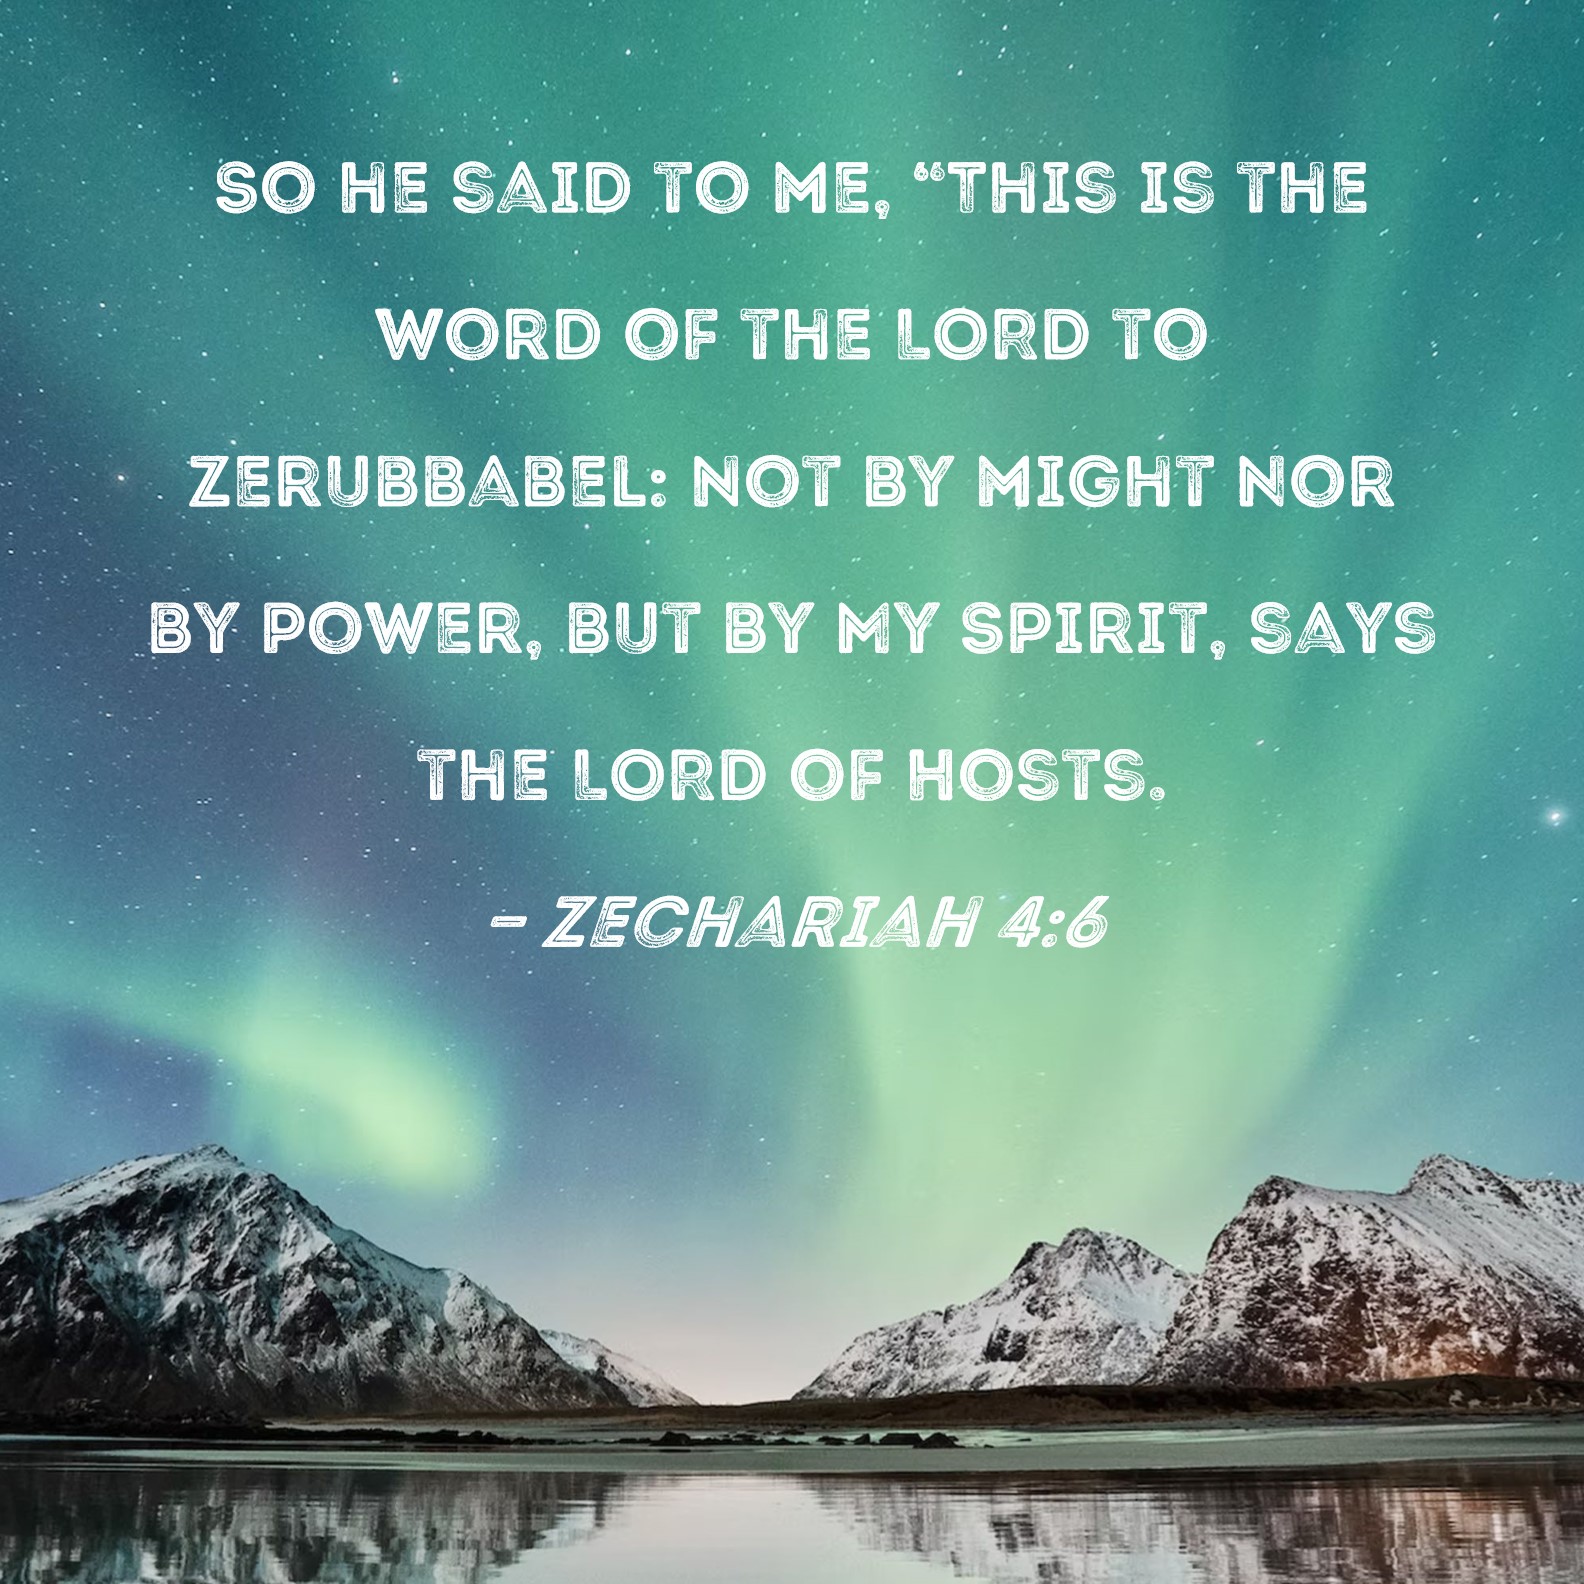 Zechariah 4:6 So he said to me, This is the word of the LORD to